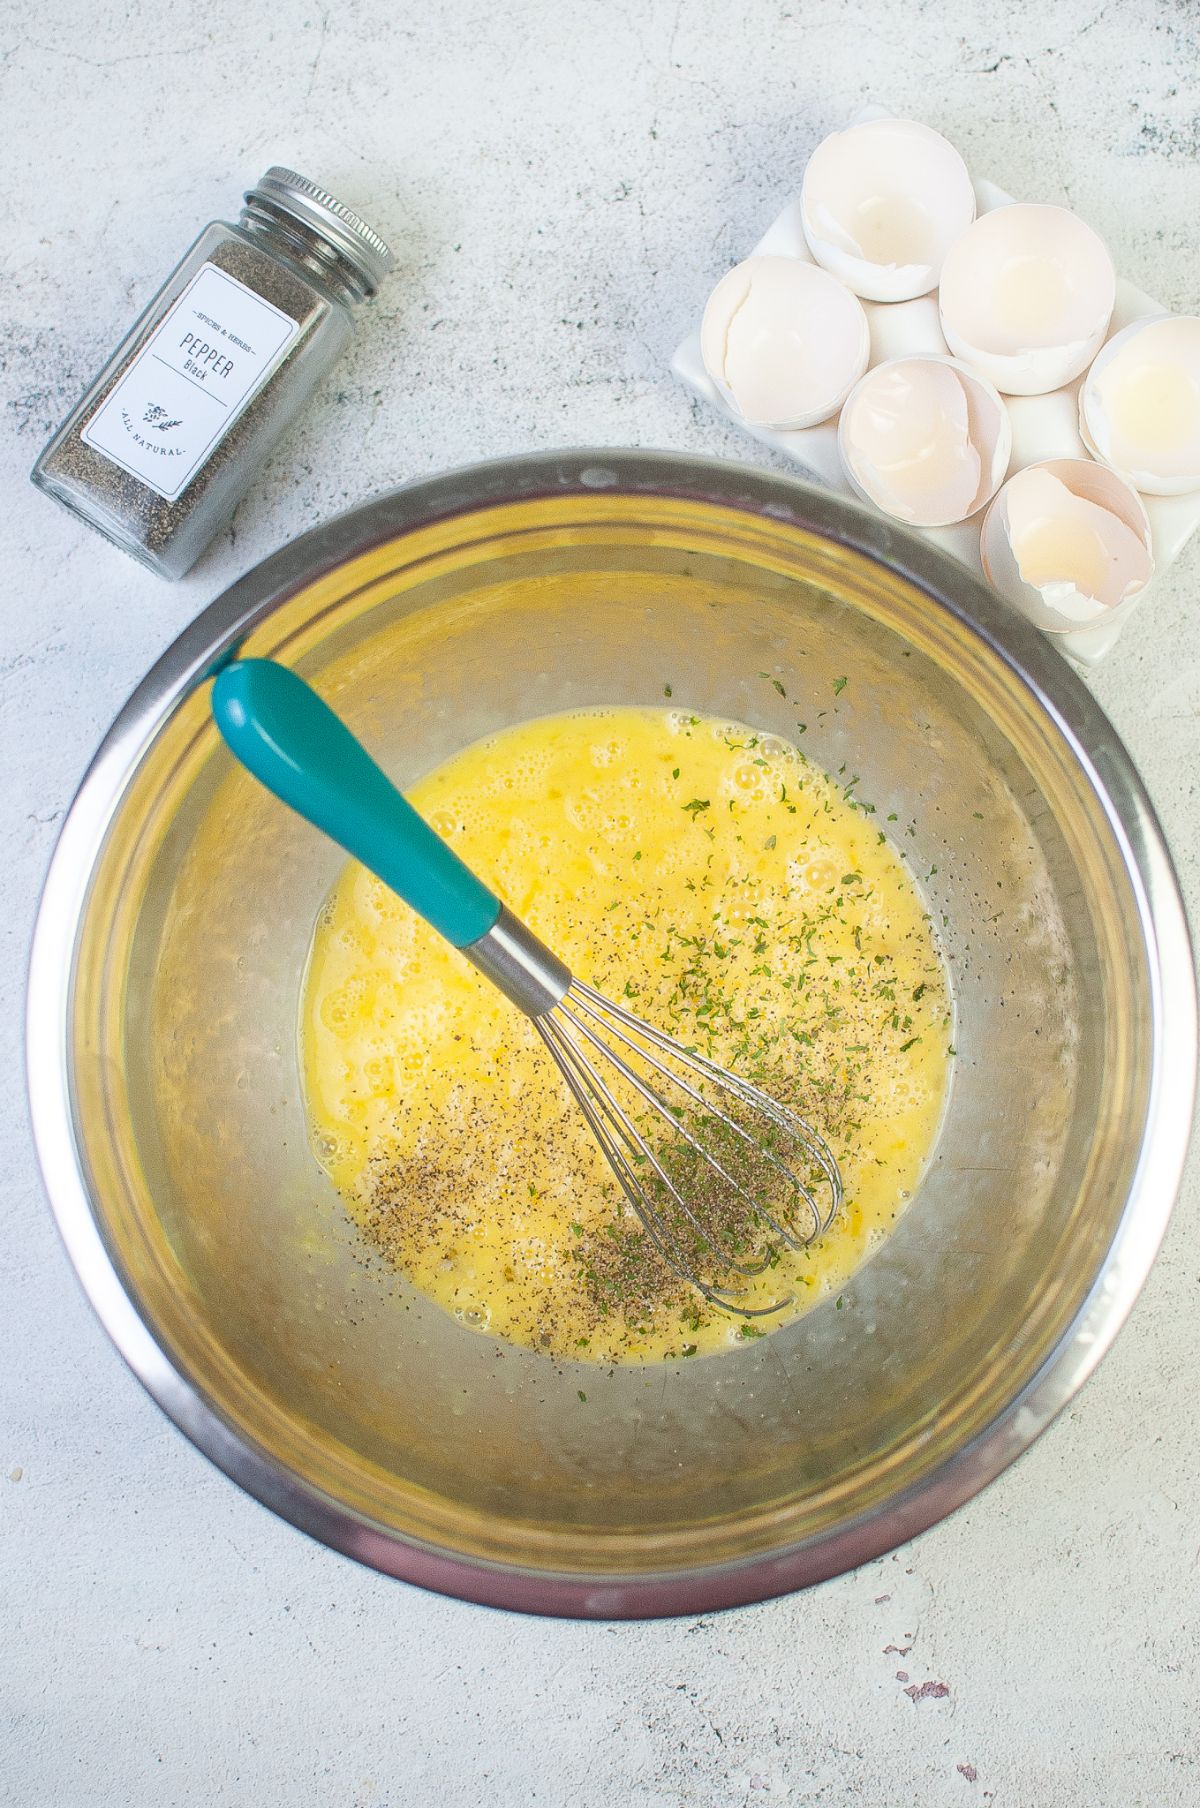 Egg and seasoning in a mixing bowl with whisk.